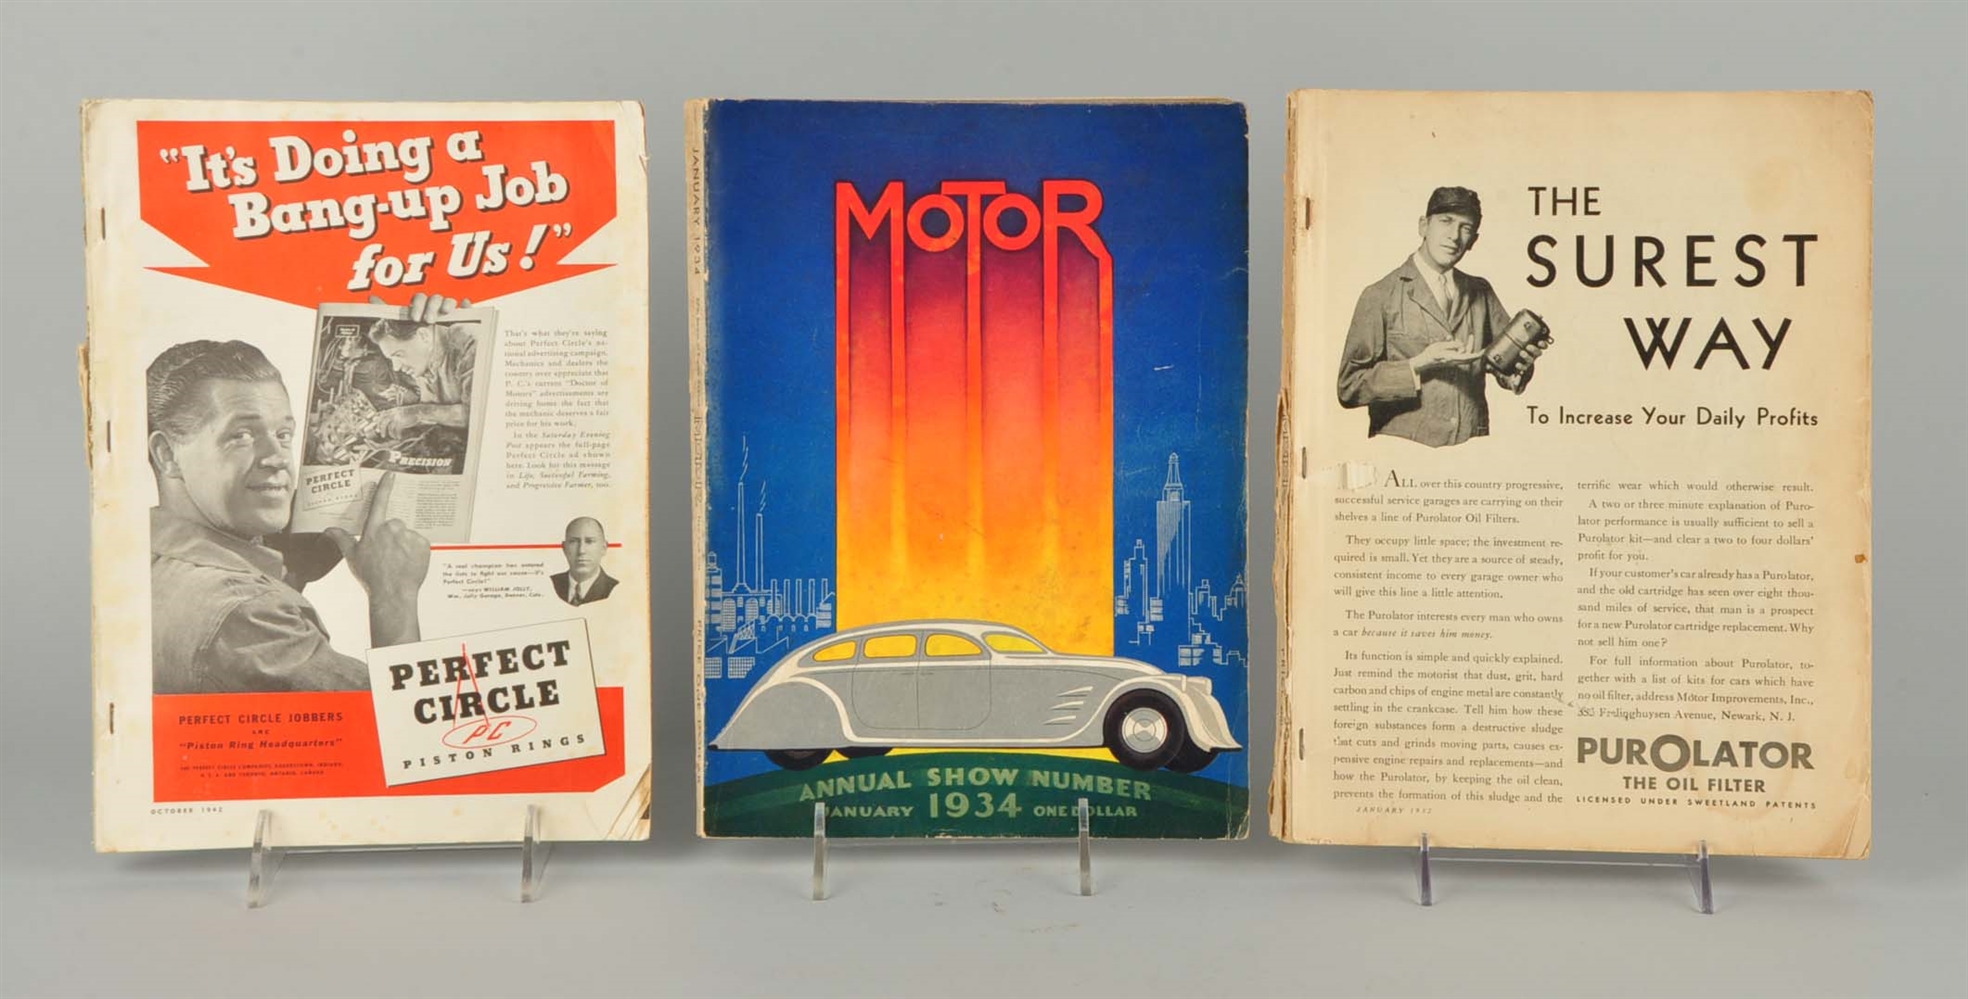 LOT OF 3: "MOTOR" CATALOGUES.